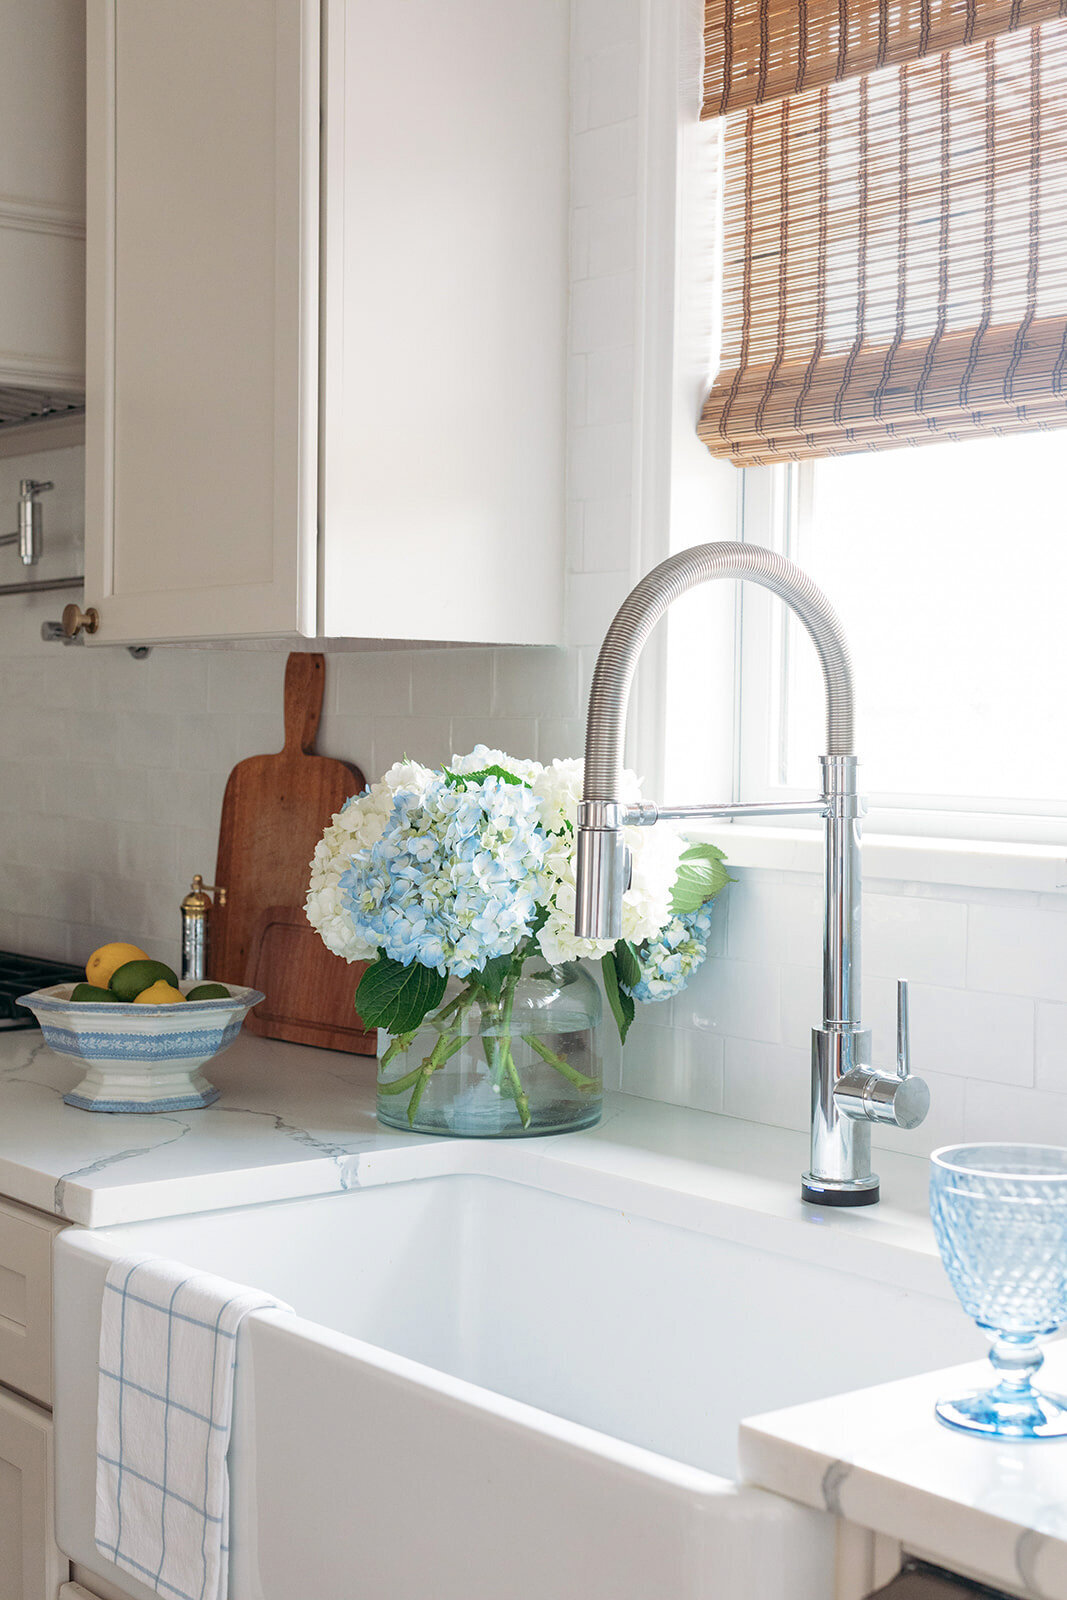 Fresh kitchen design with white porcelain sink and window with bamboo shades